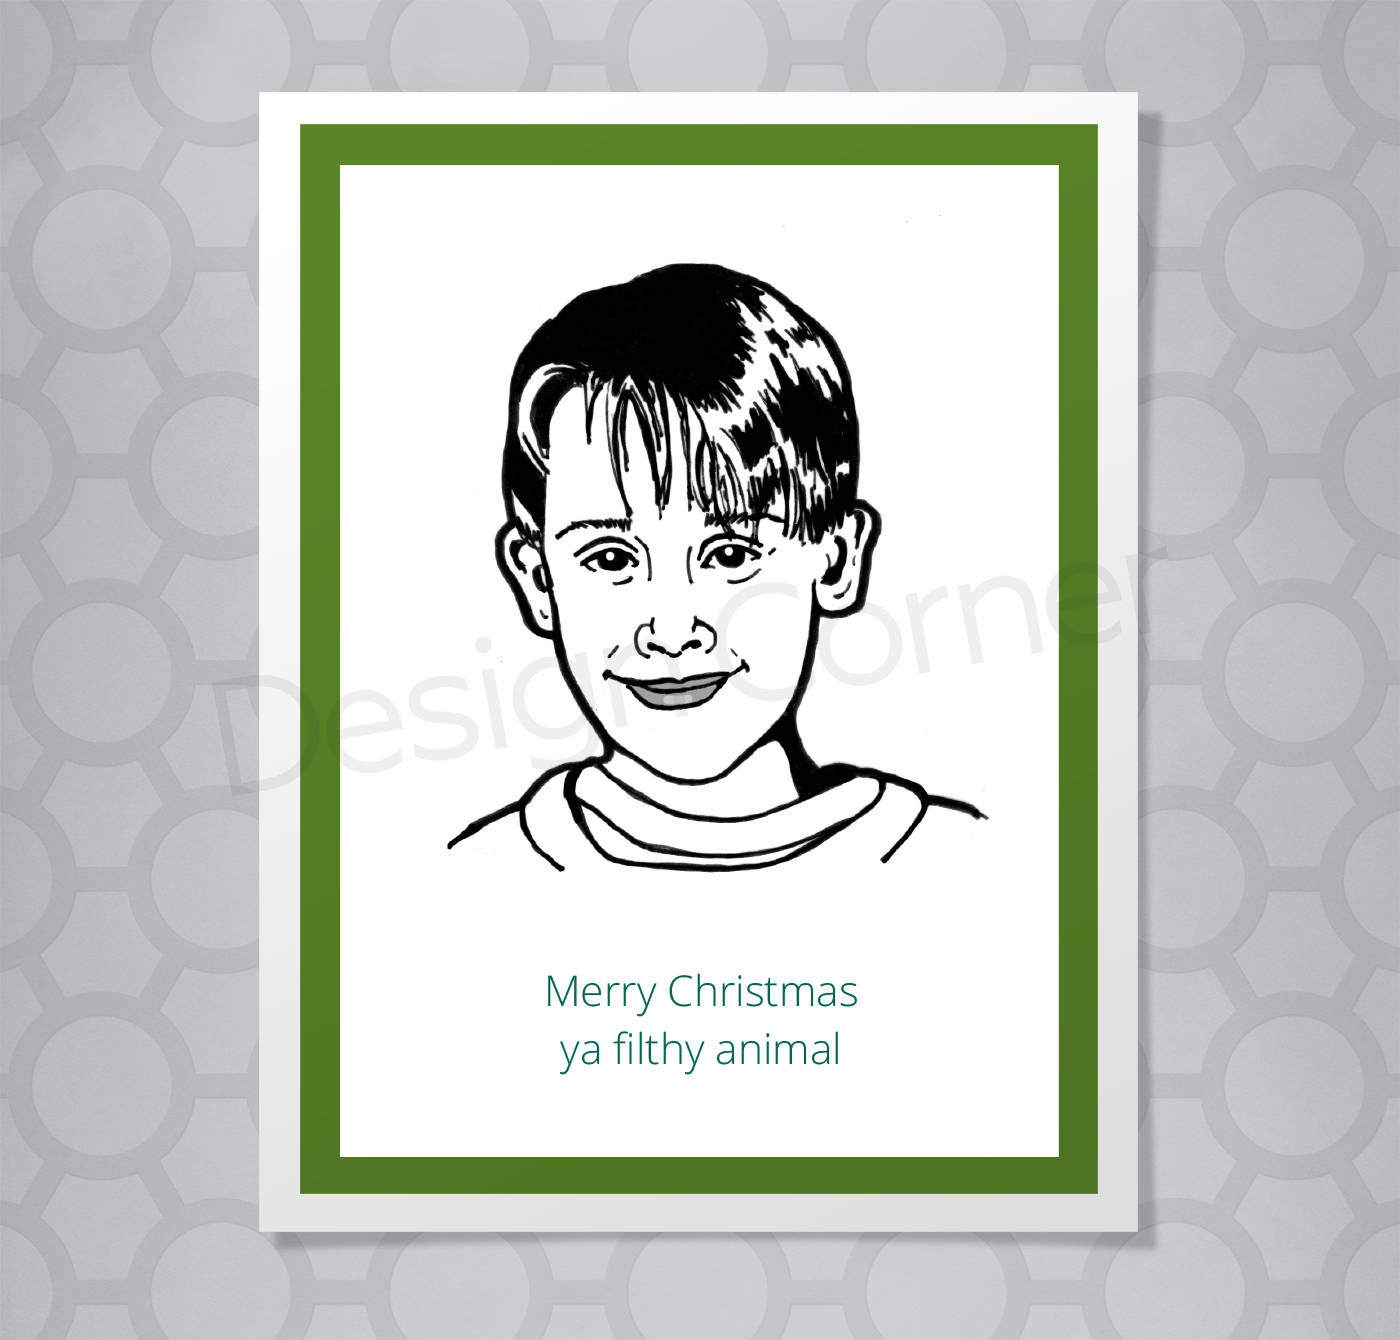 Illustration of Home Alone's Kevin on front of Christmas card with caption "Merry Christmas, ya filthy animal"